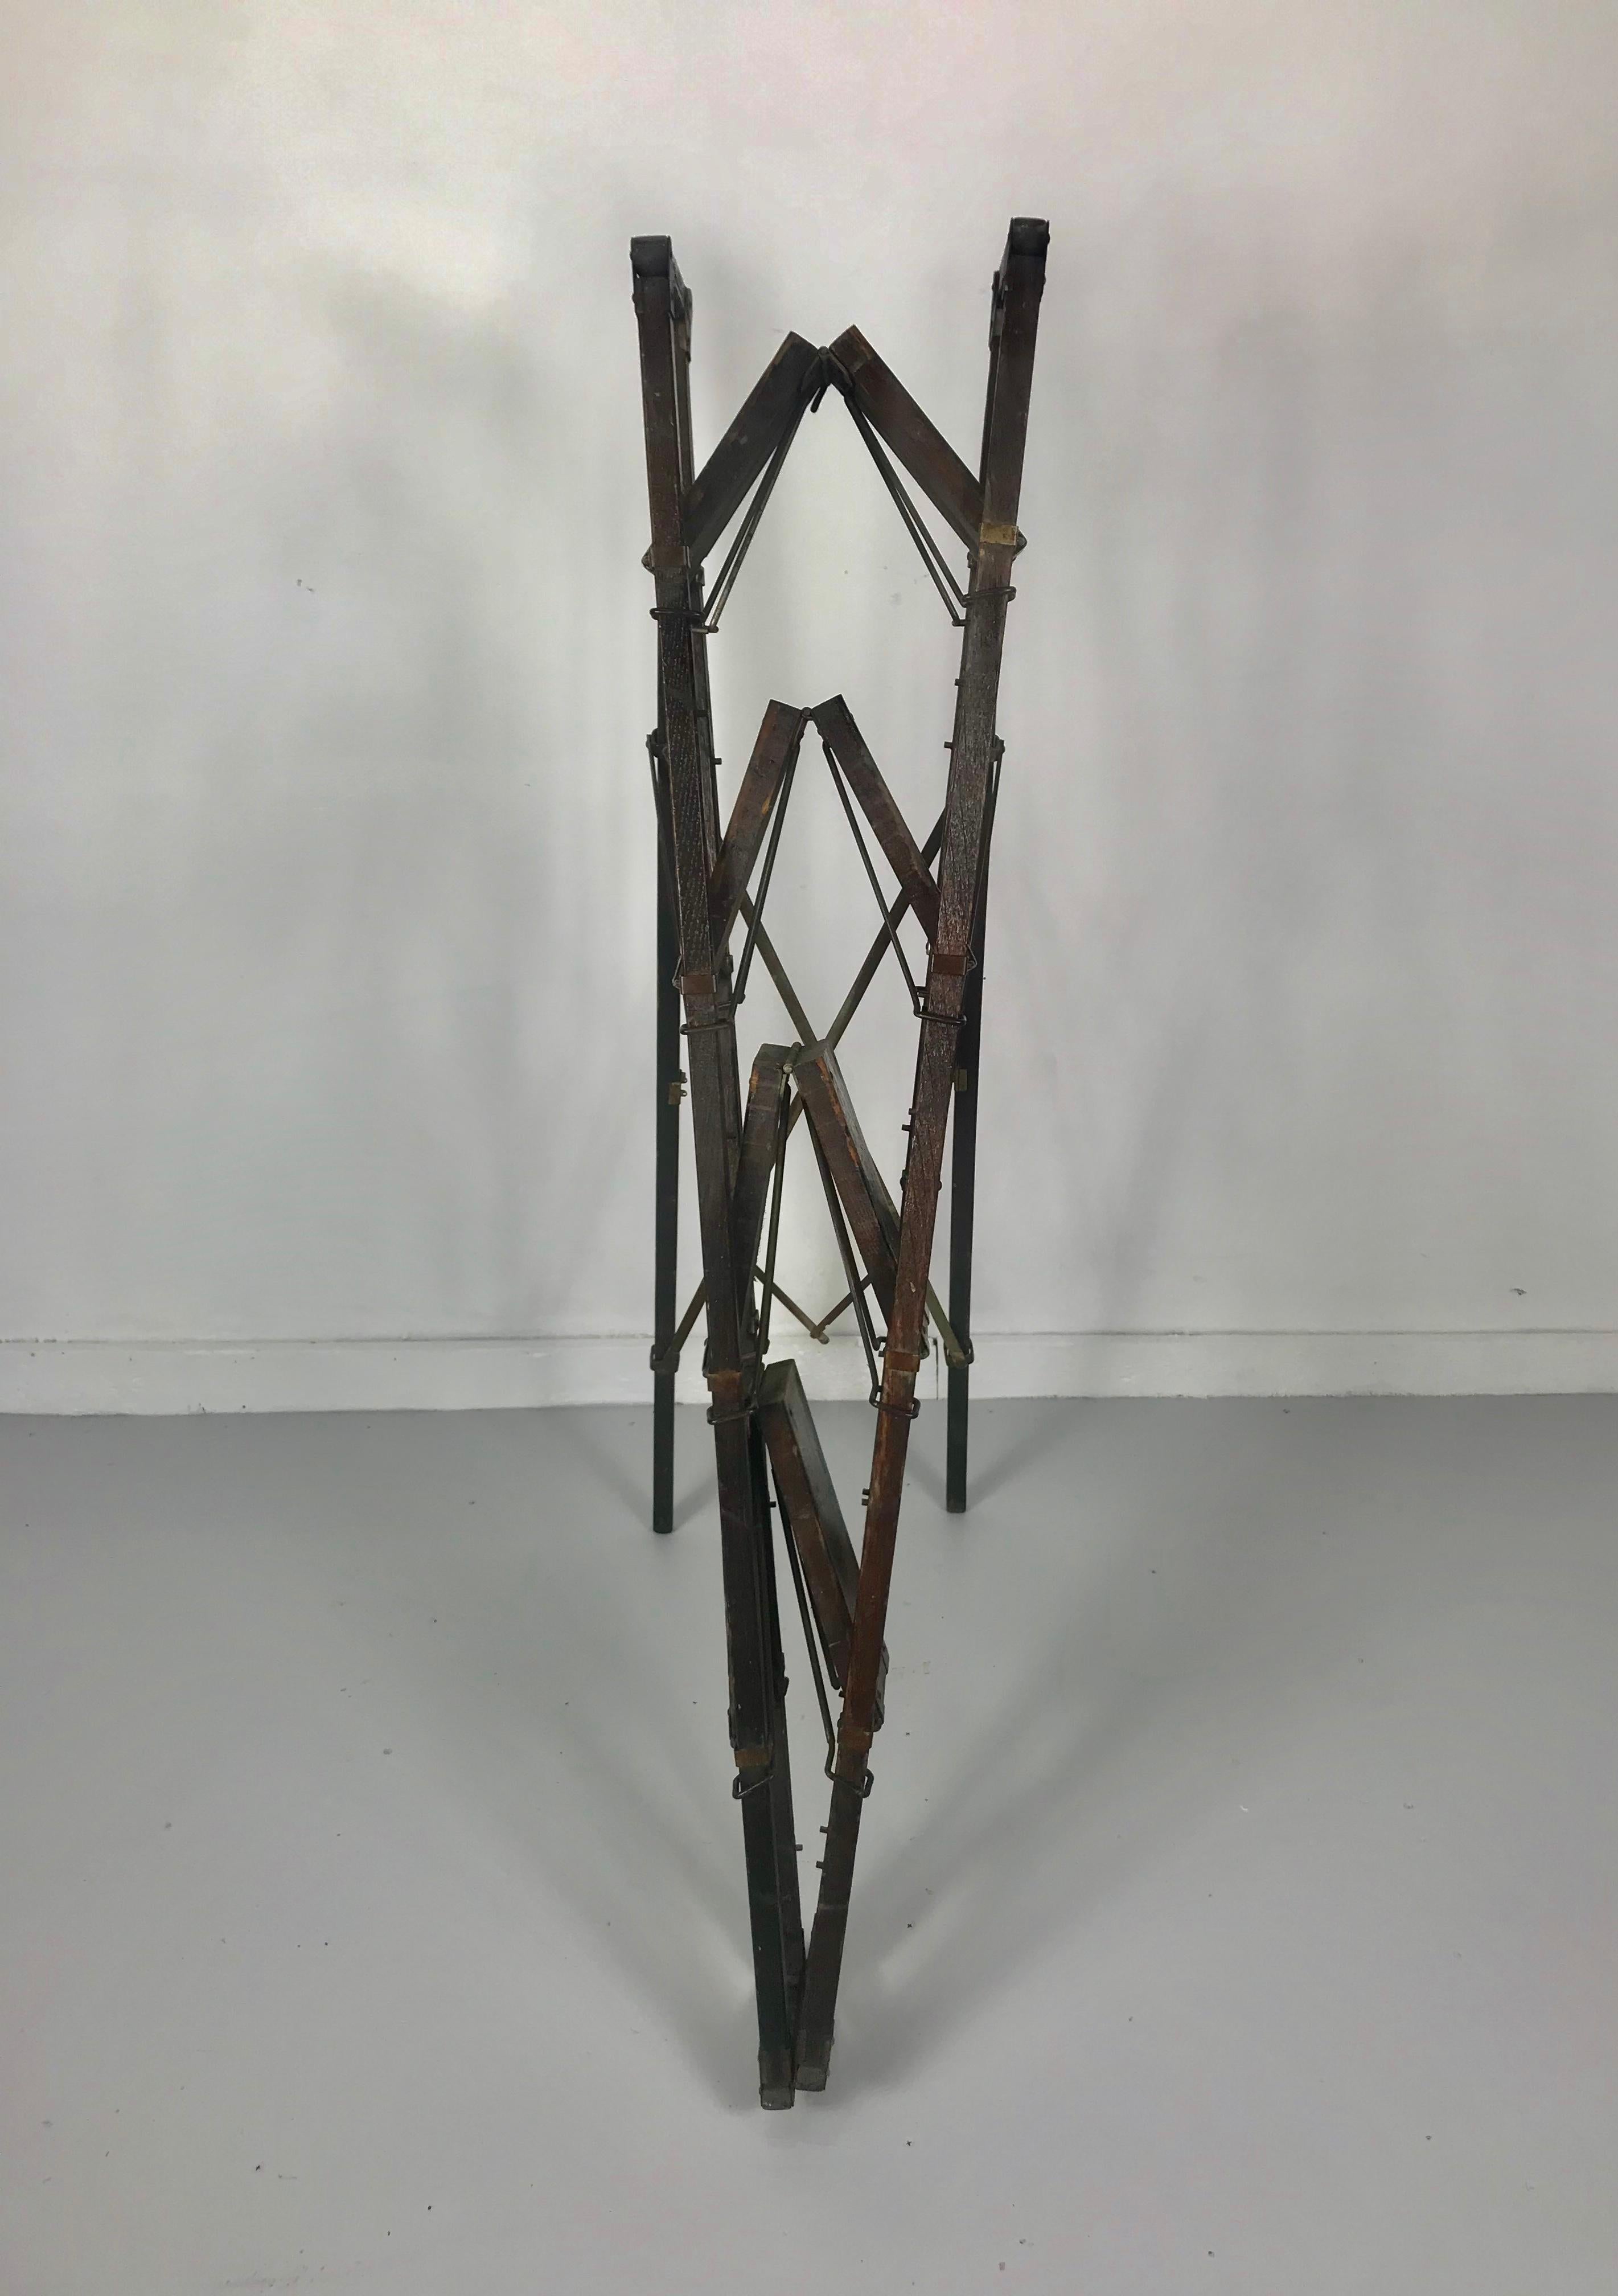 Rare turn of century industrial collapsable step ladder, truly amazing design and engineering, folding and collapsing to 8